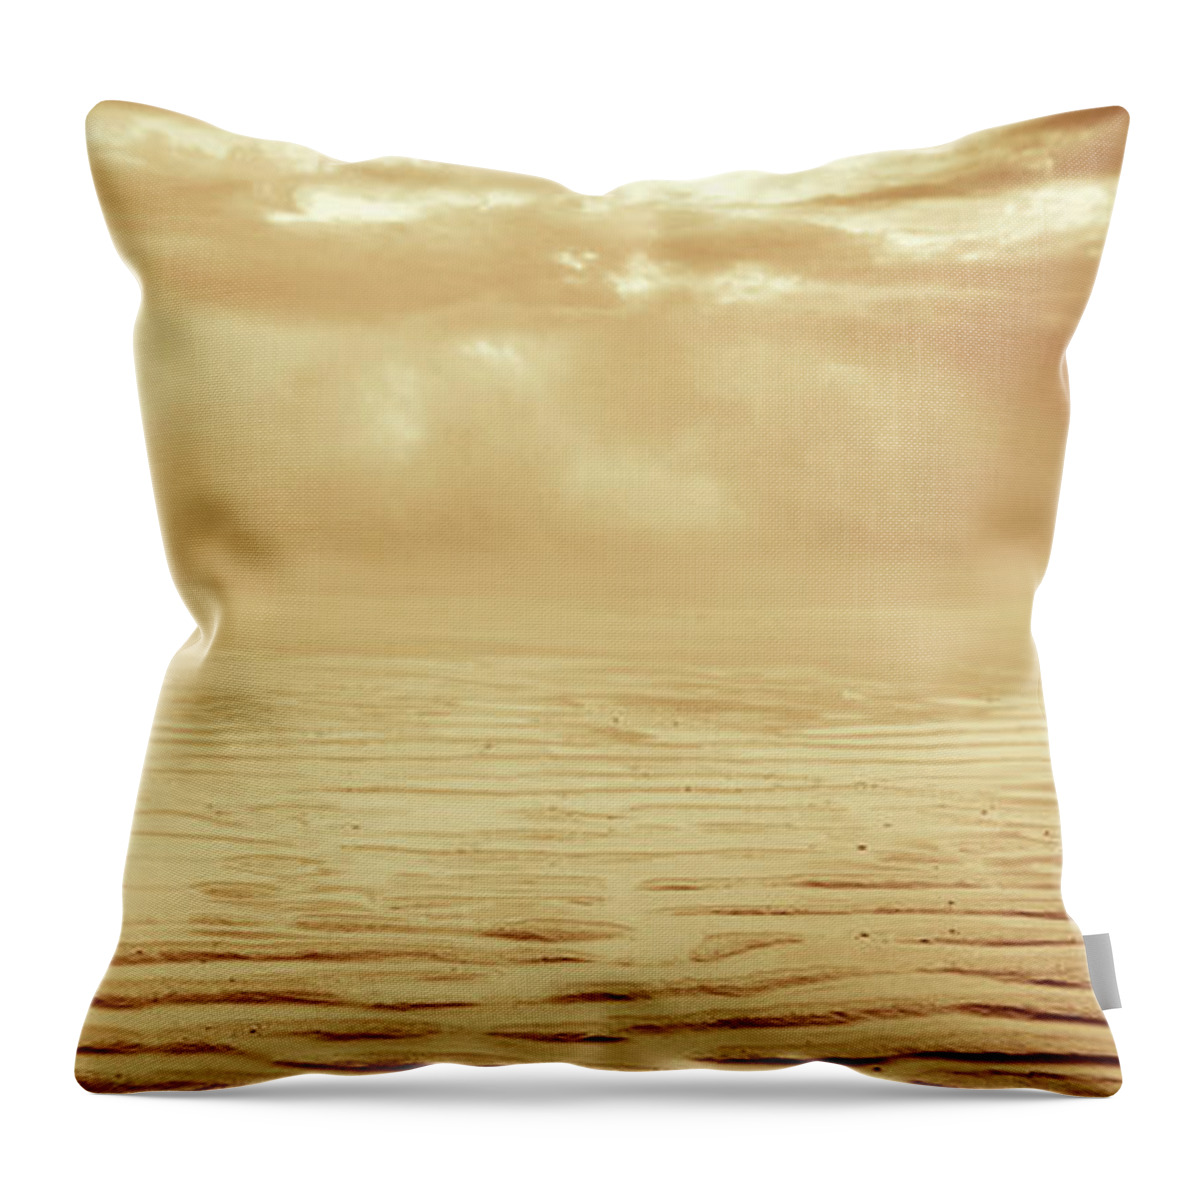 Dipasquale Throw Pillow featuring the photograph Illusion Never Changed Into Something Real by Dana DiPasquale